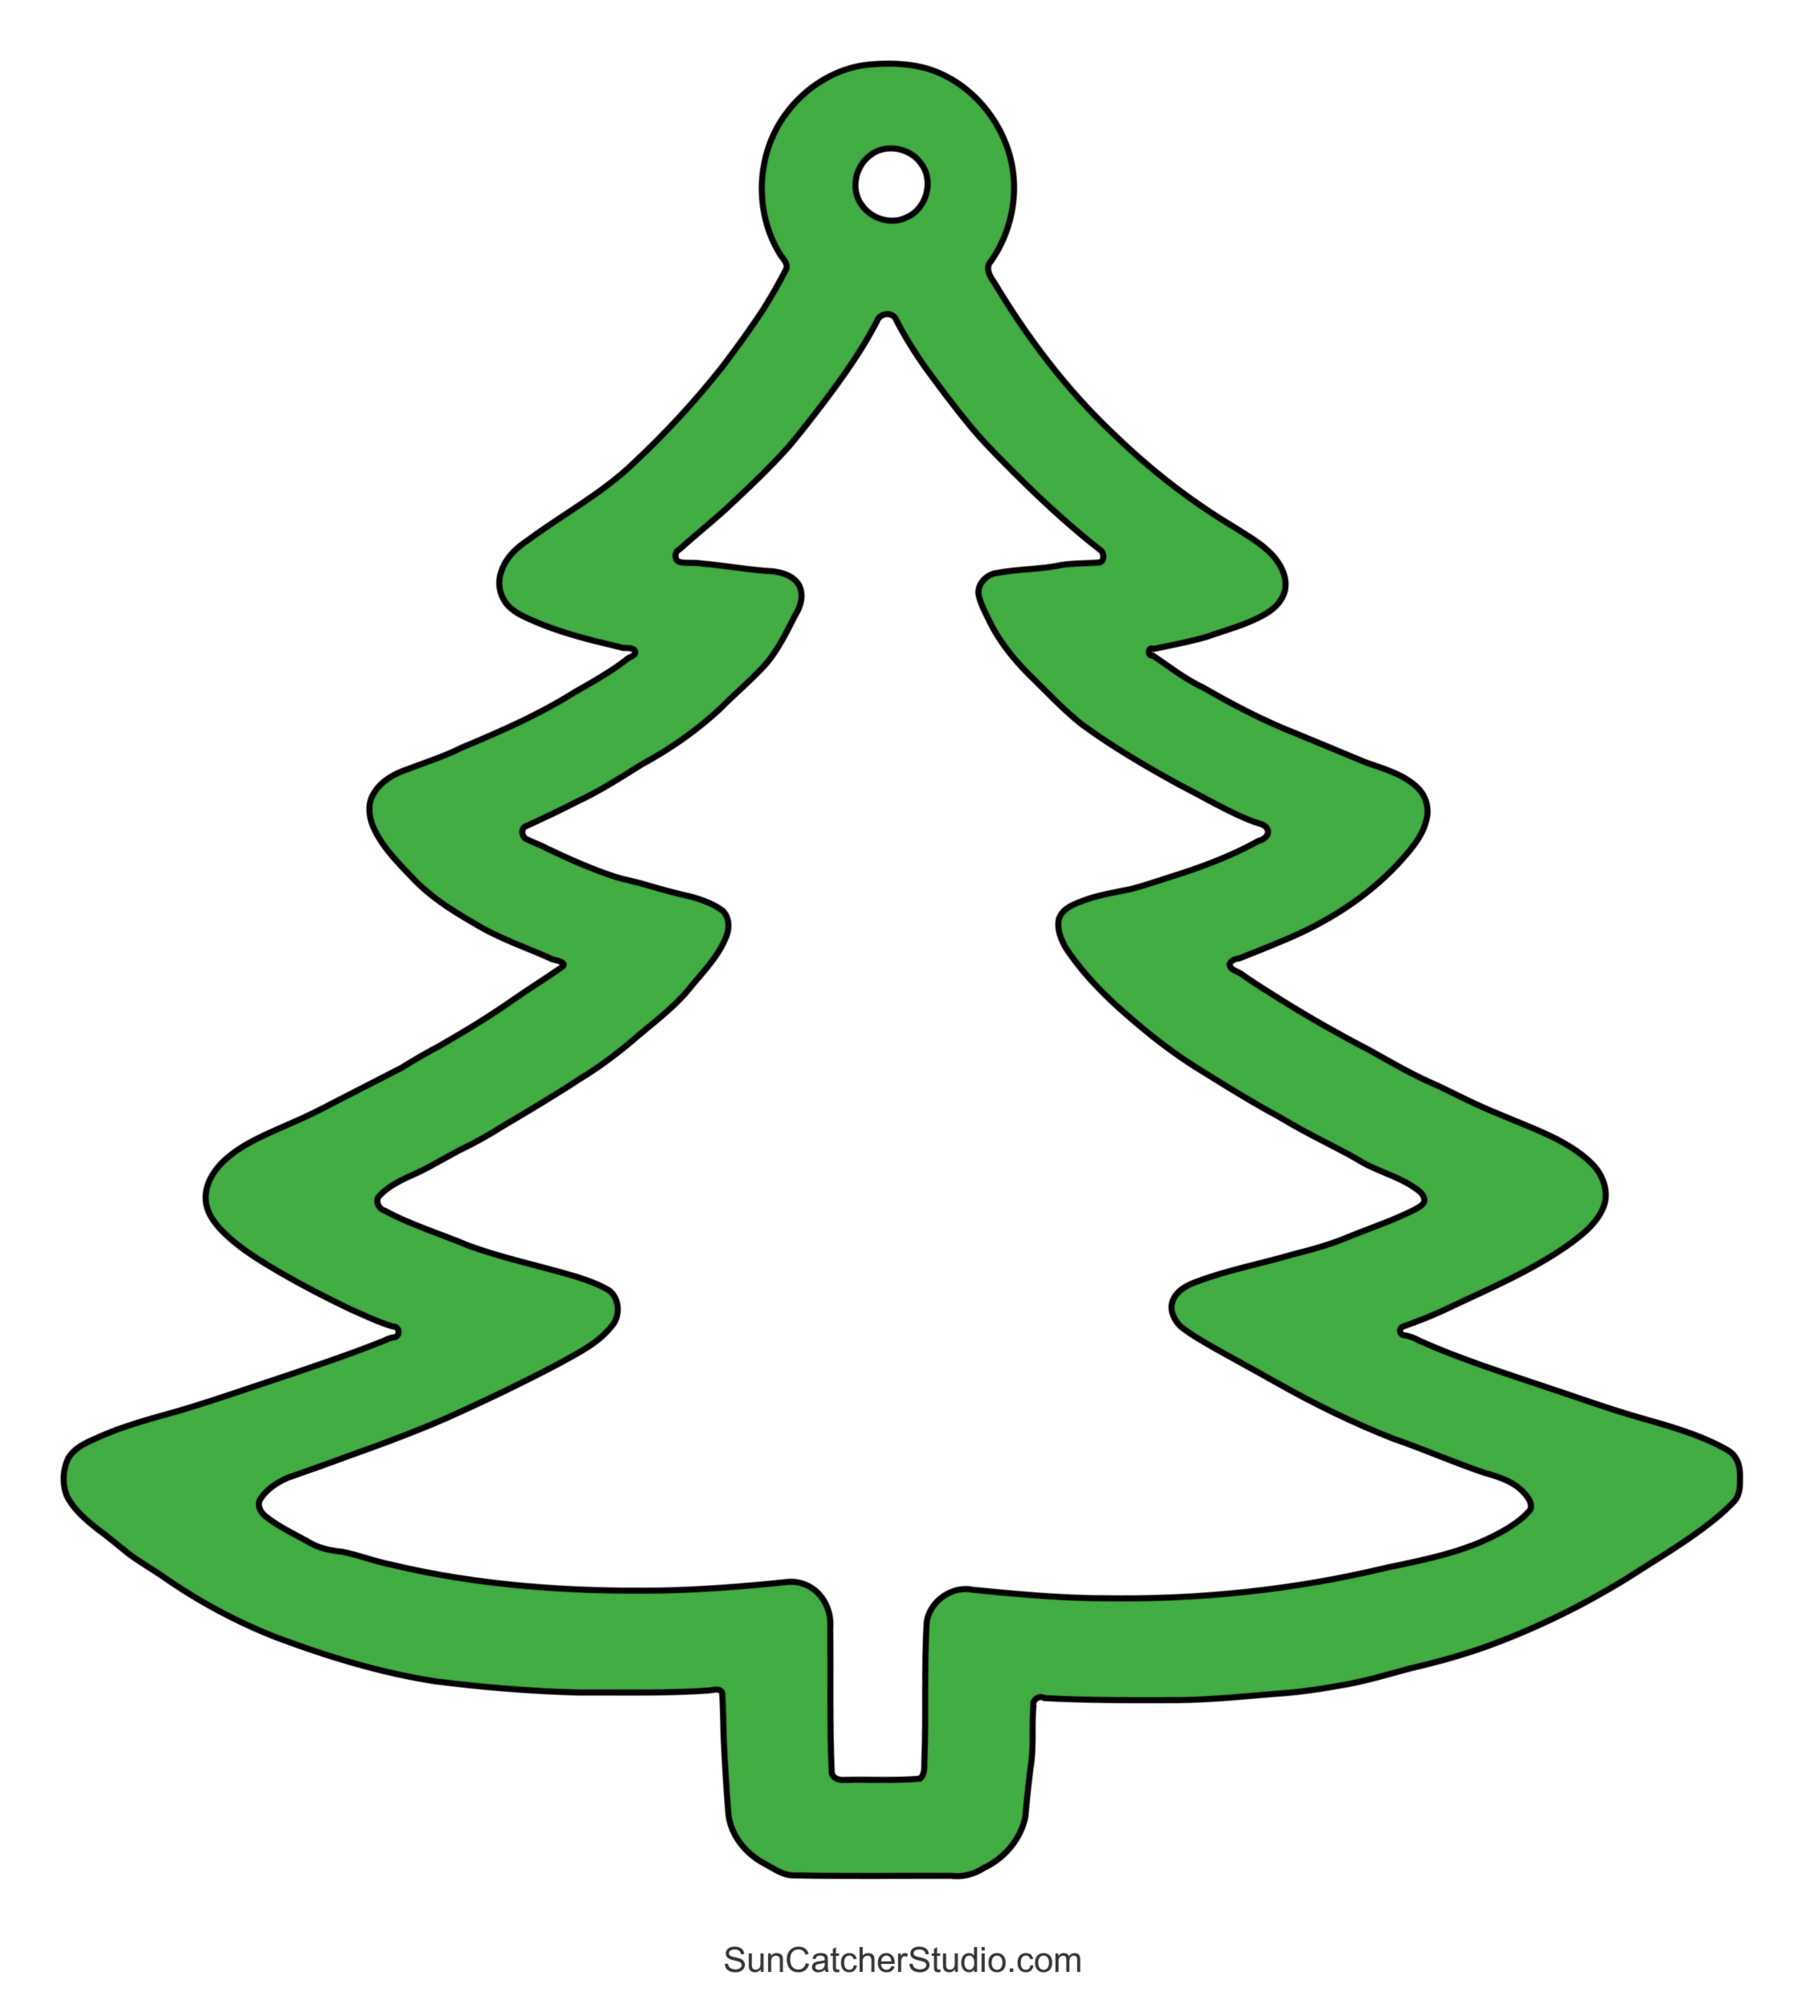 Christmas tree templates and stencils free printable patterns â diy projects patterns monograms designs templates